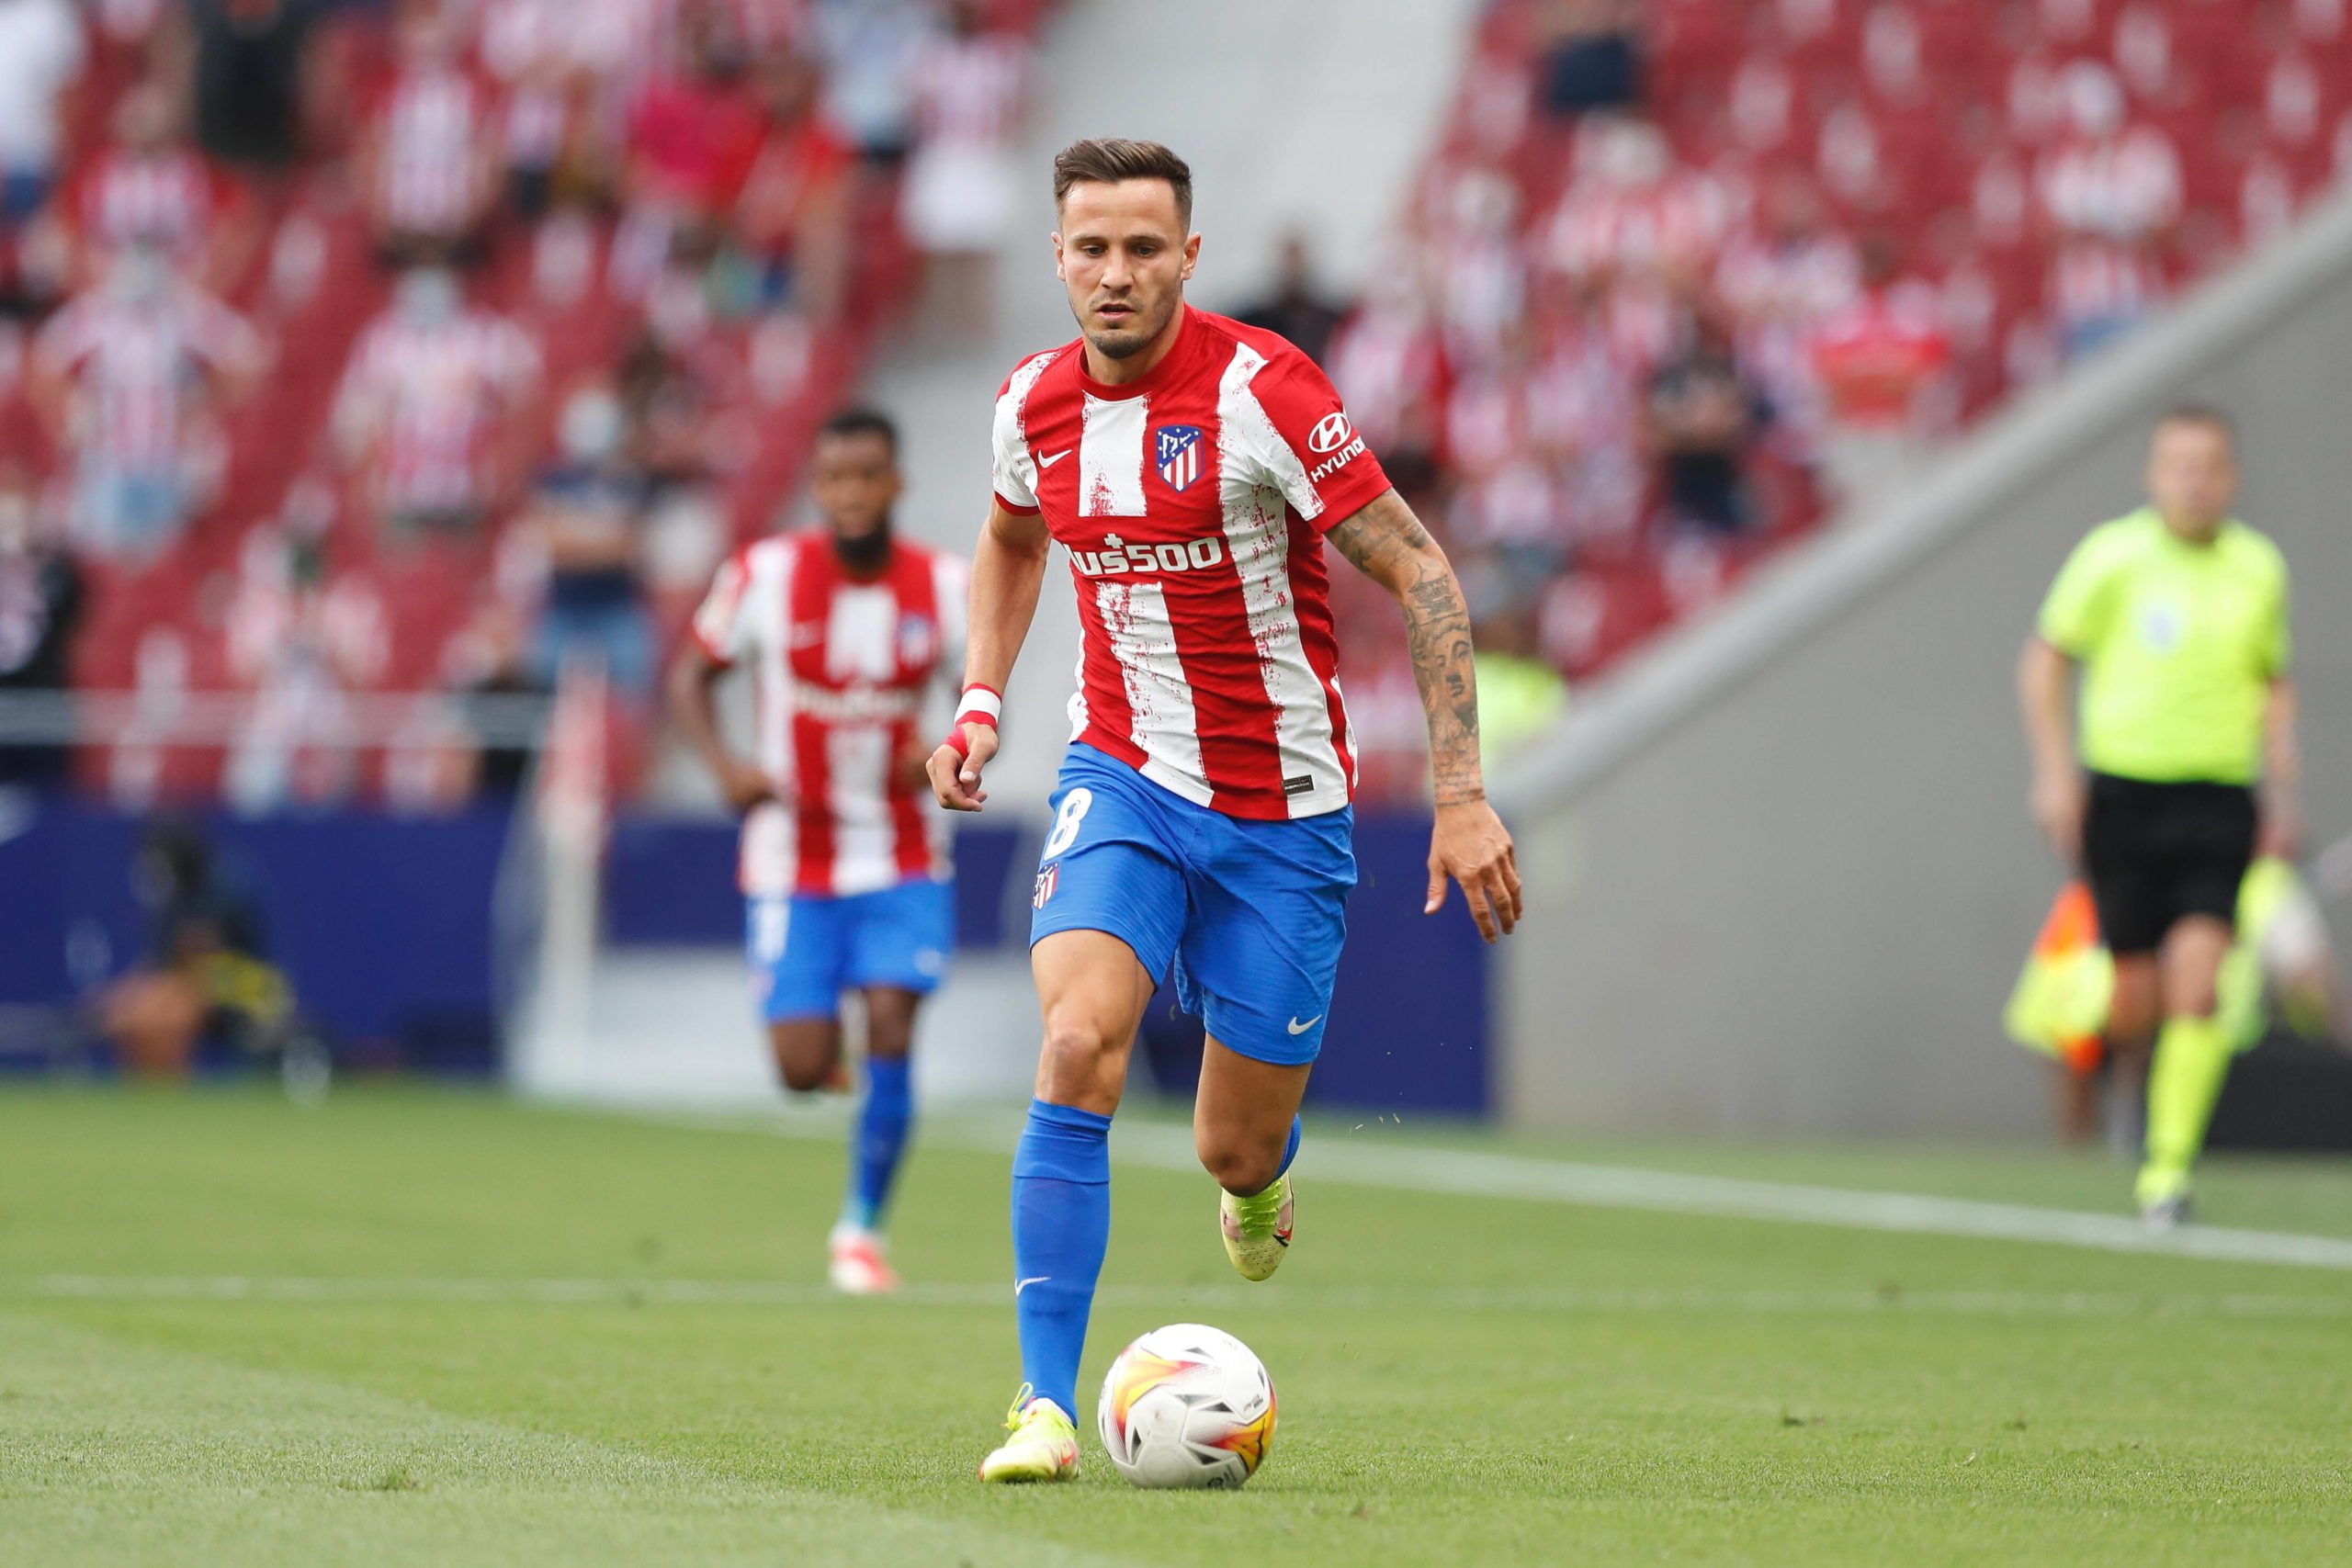 Chelsea complete the signing of Saul Niguez on loan (Saul Niguez is seen in the picture)